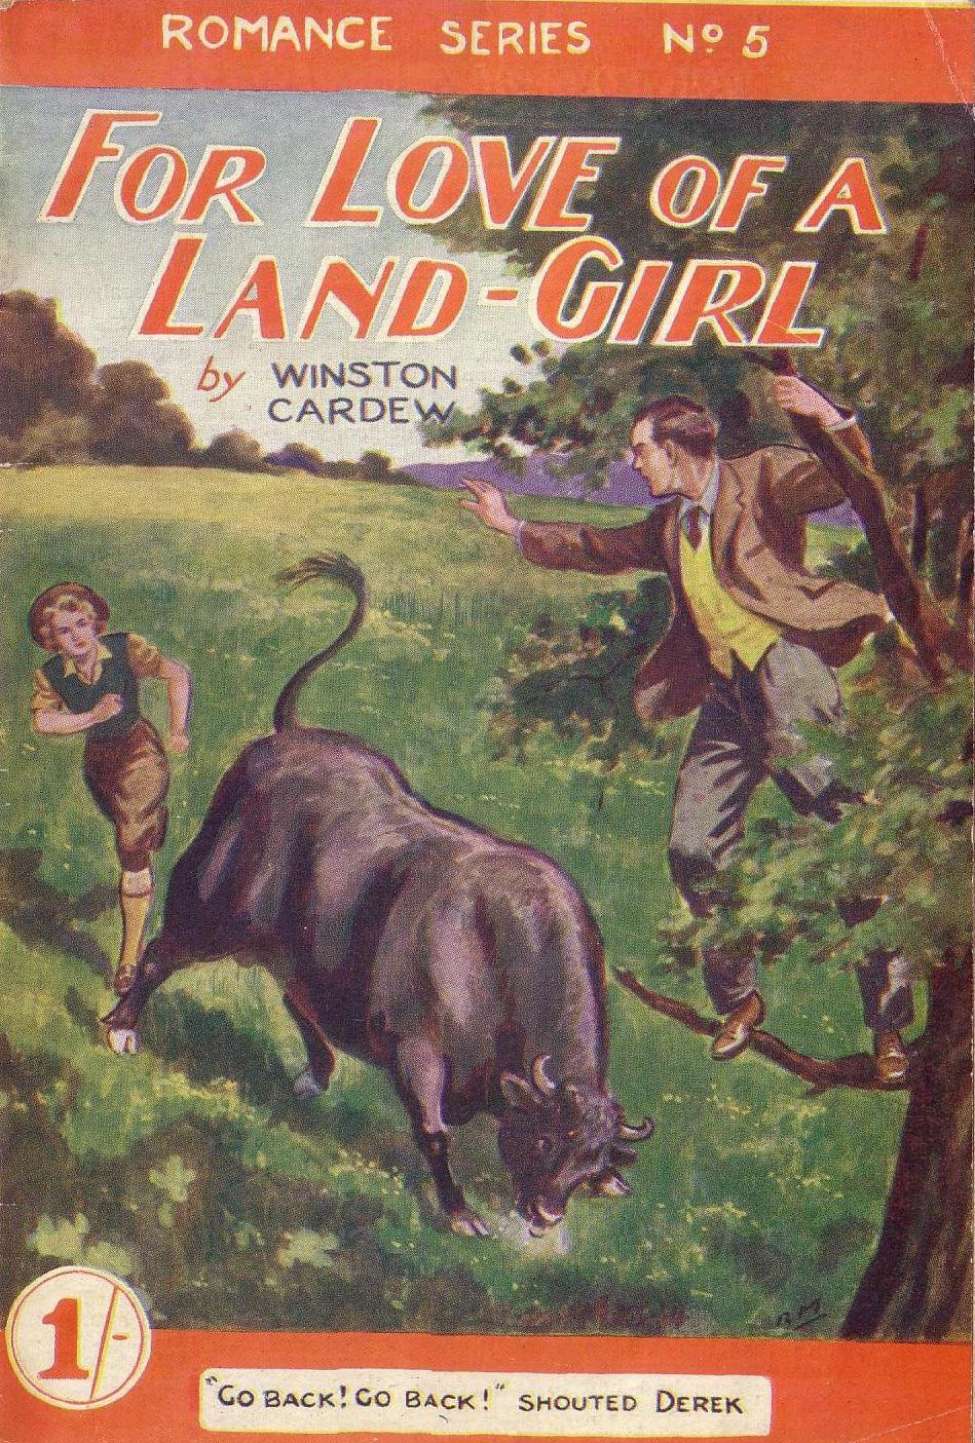 Book Cover For Romance Series 5 For Love Of A Land Girl